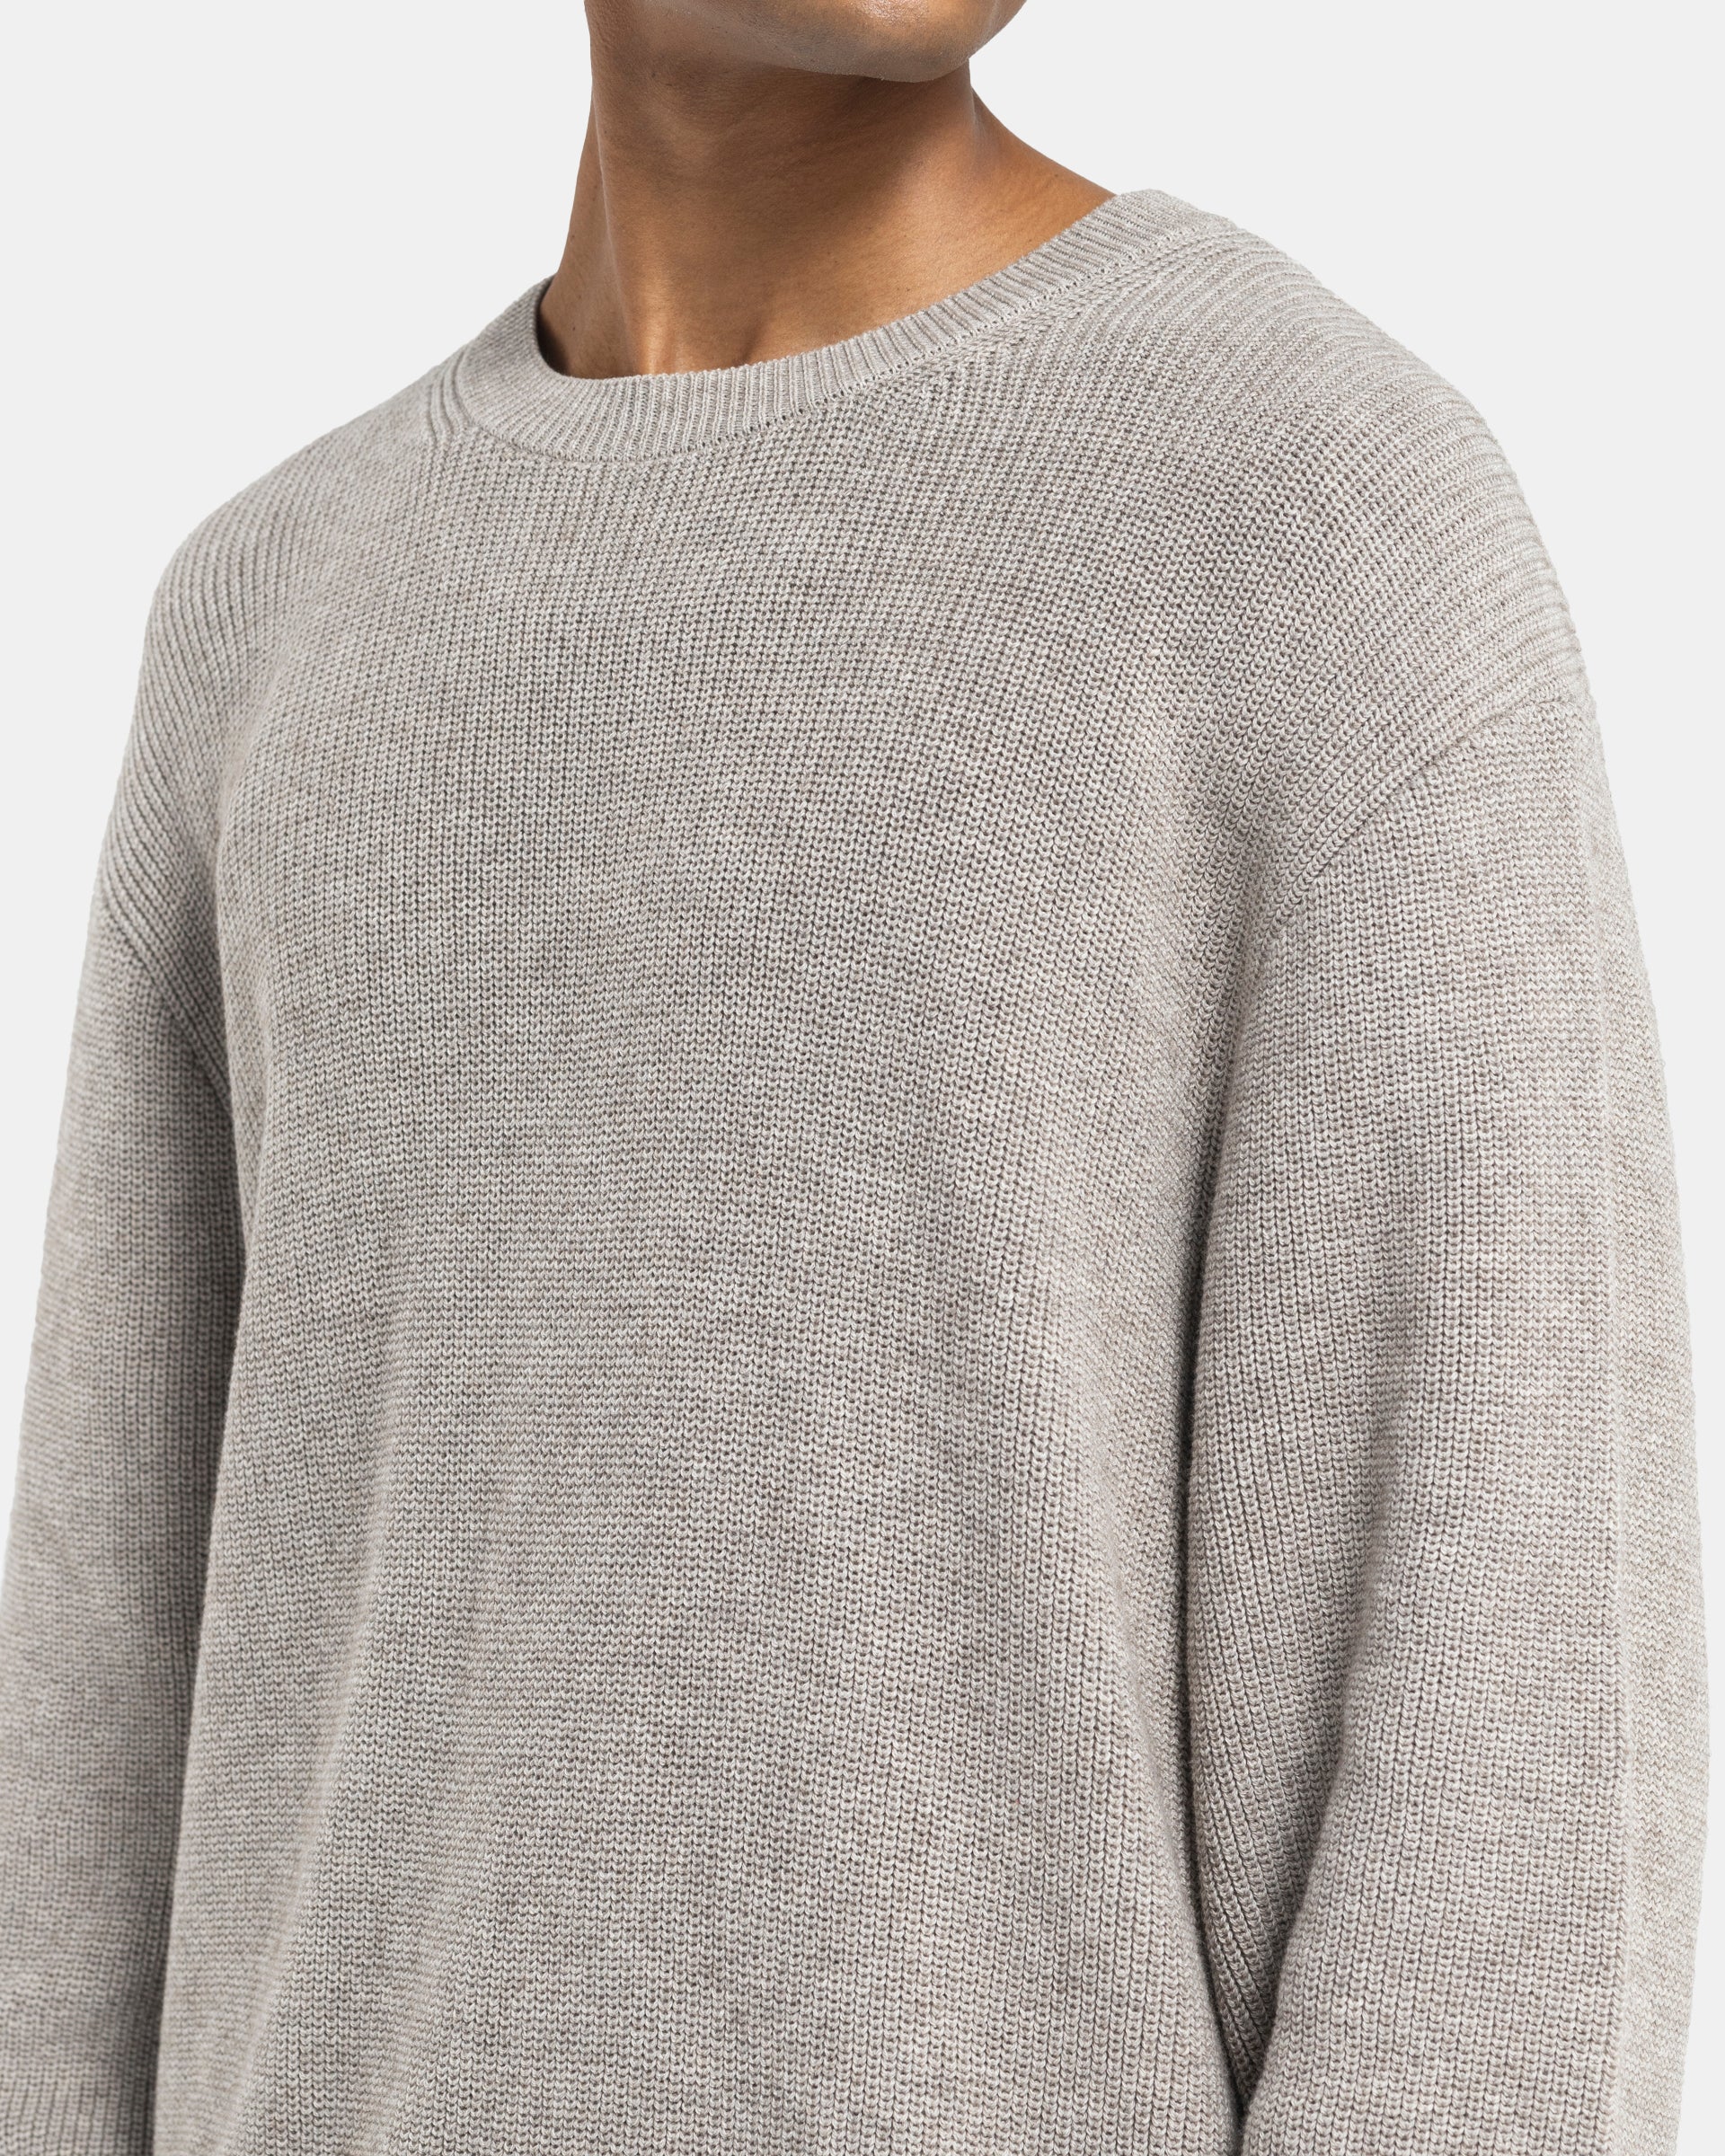 Yak Mix Cotton Sweater in Taupe